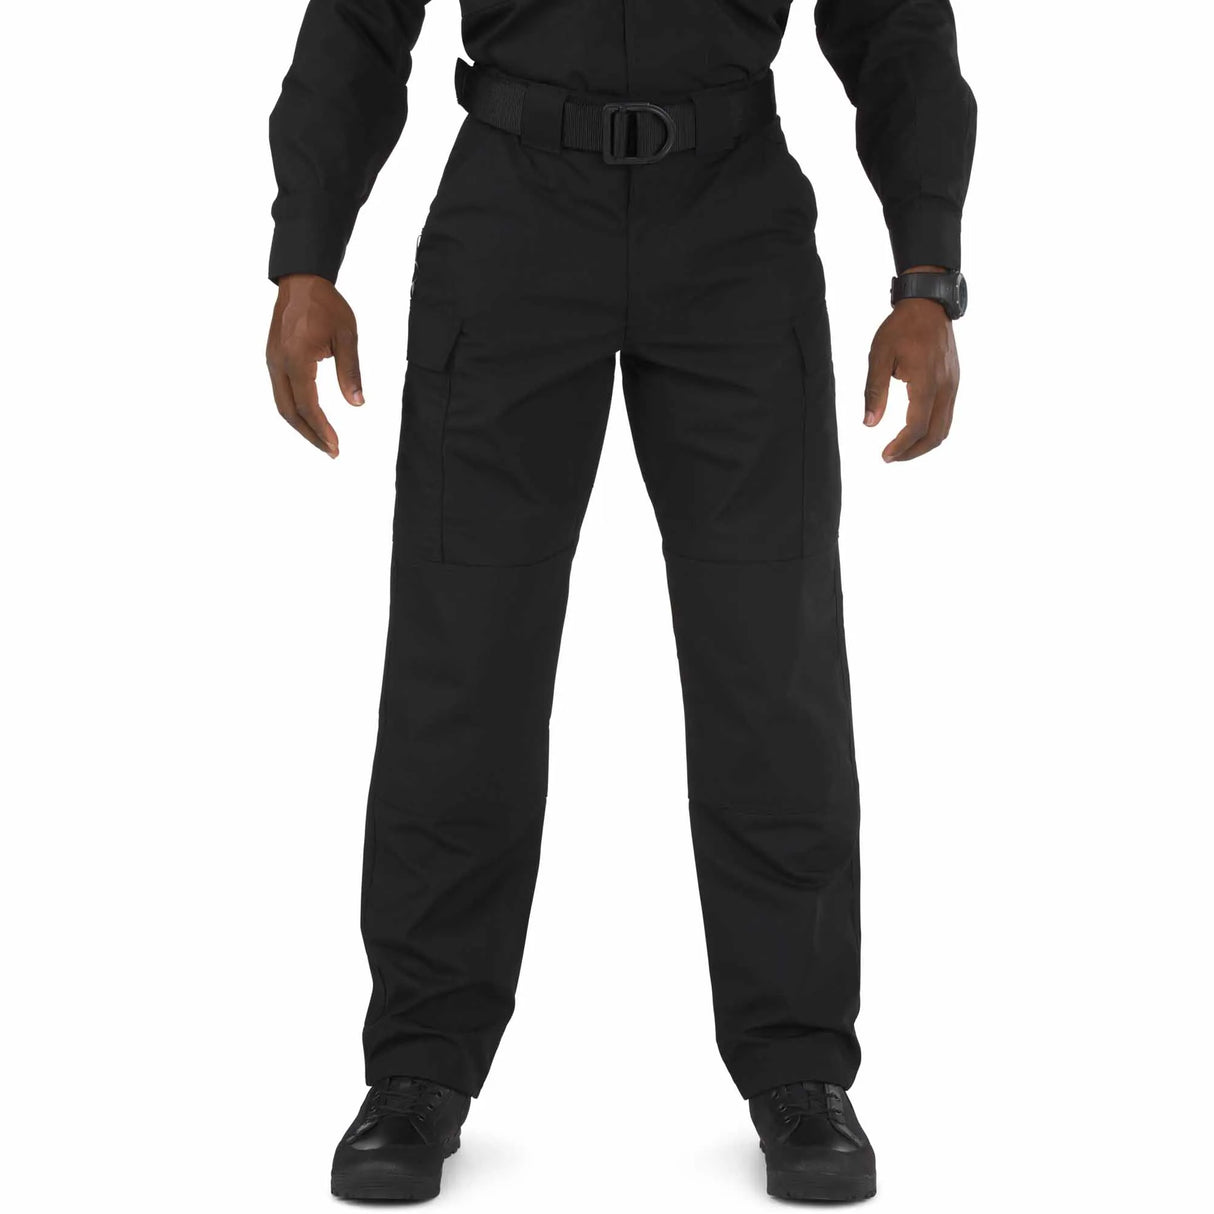 Multiple Cargo Pocket Pant: Ample storage space for tactical gear and essentials.